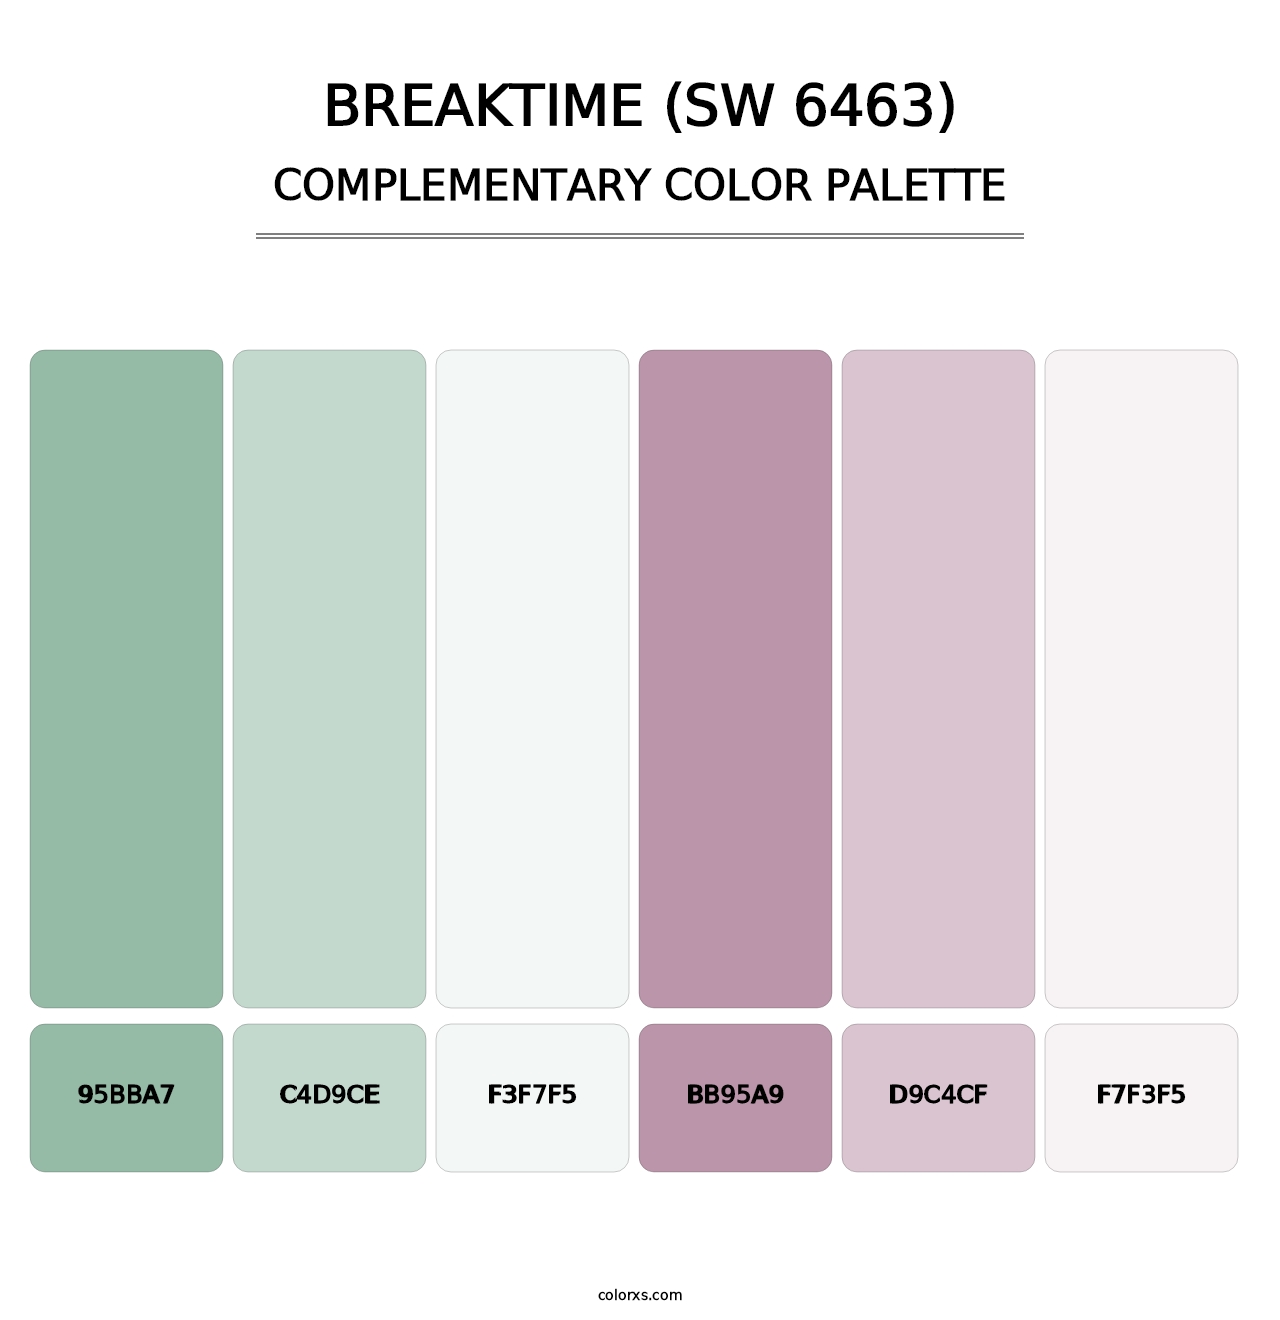 Breaktime (SW 6463) - Complementary Color Palette